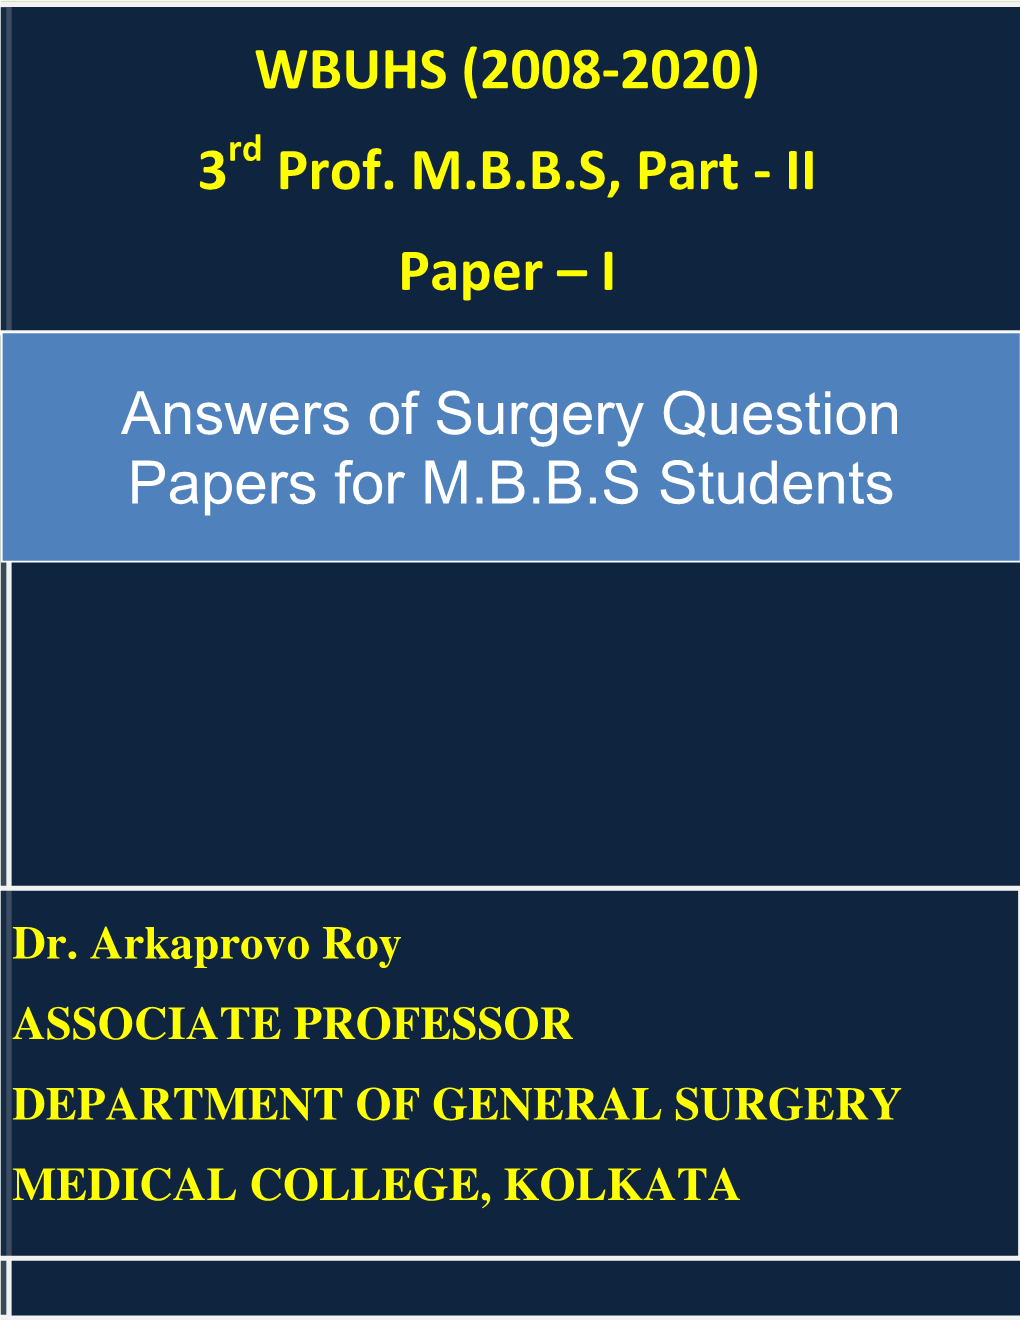 I Answers of Surgery Question Papers for MBBS Students